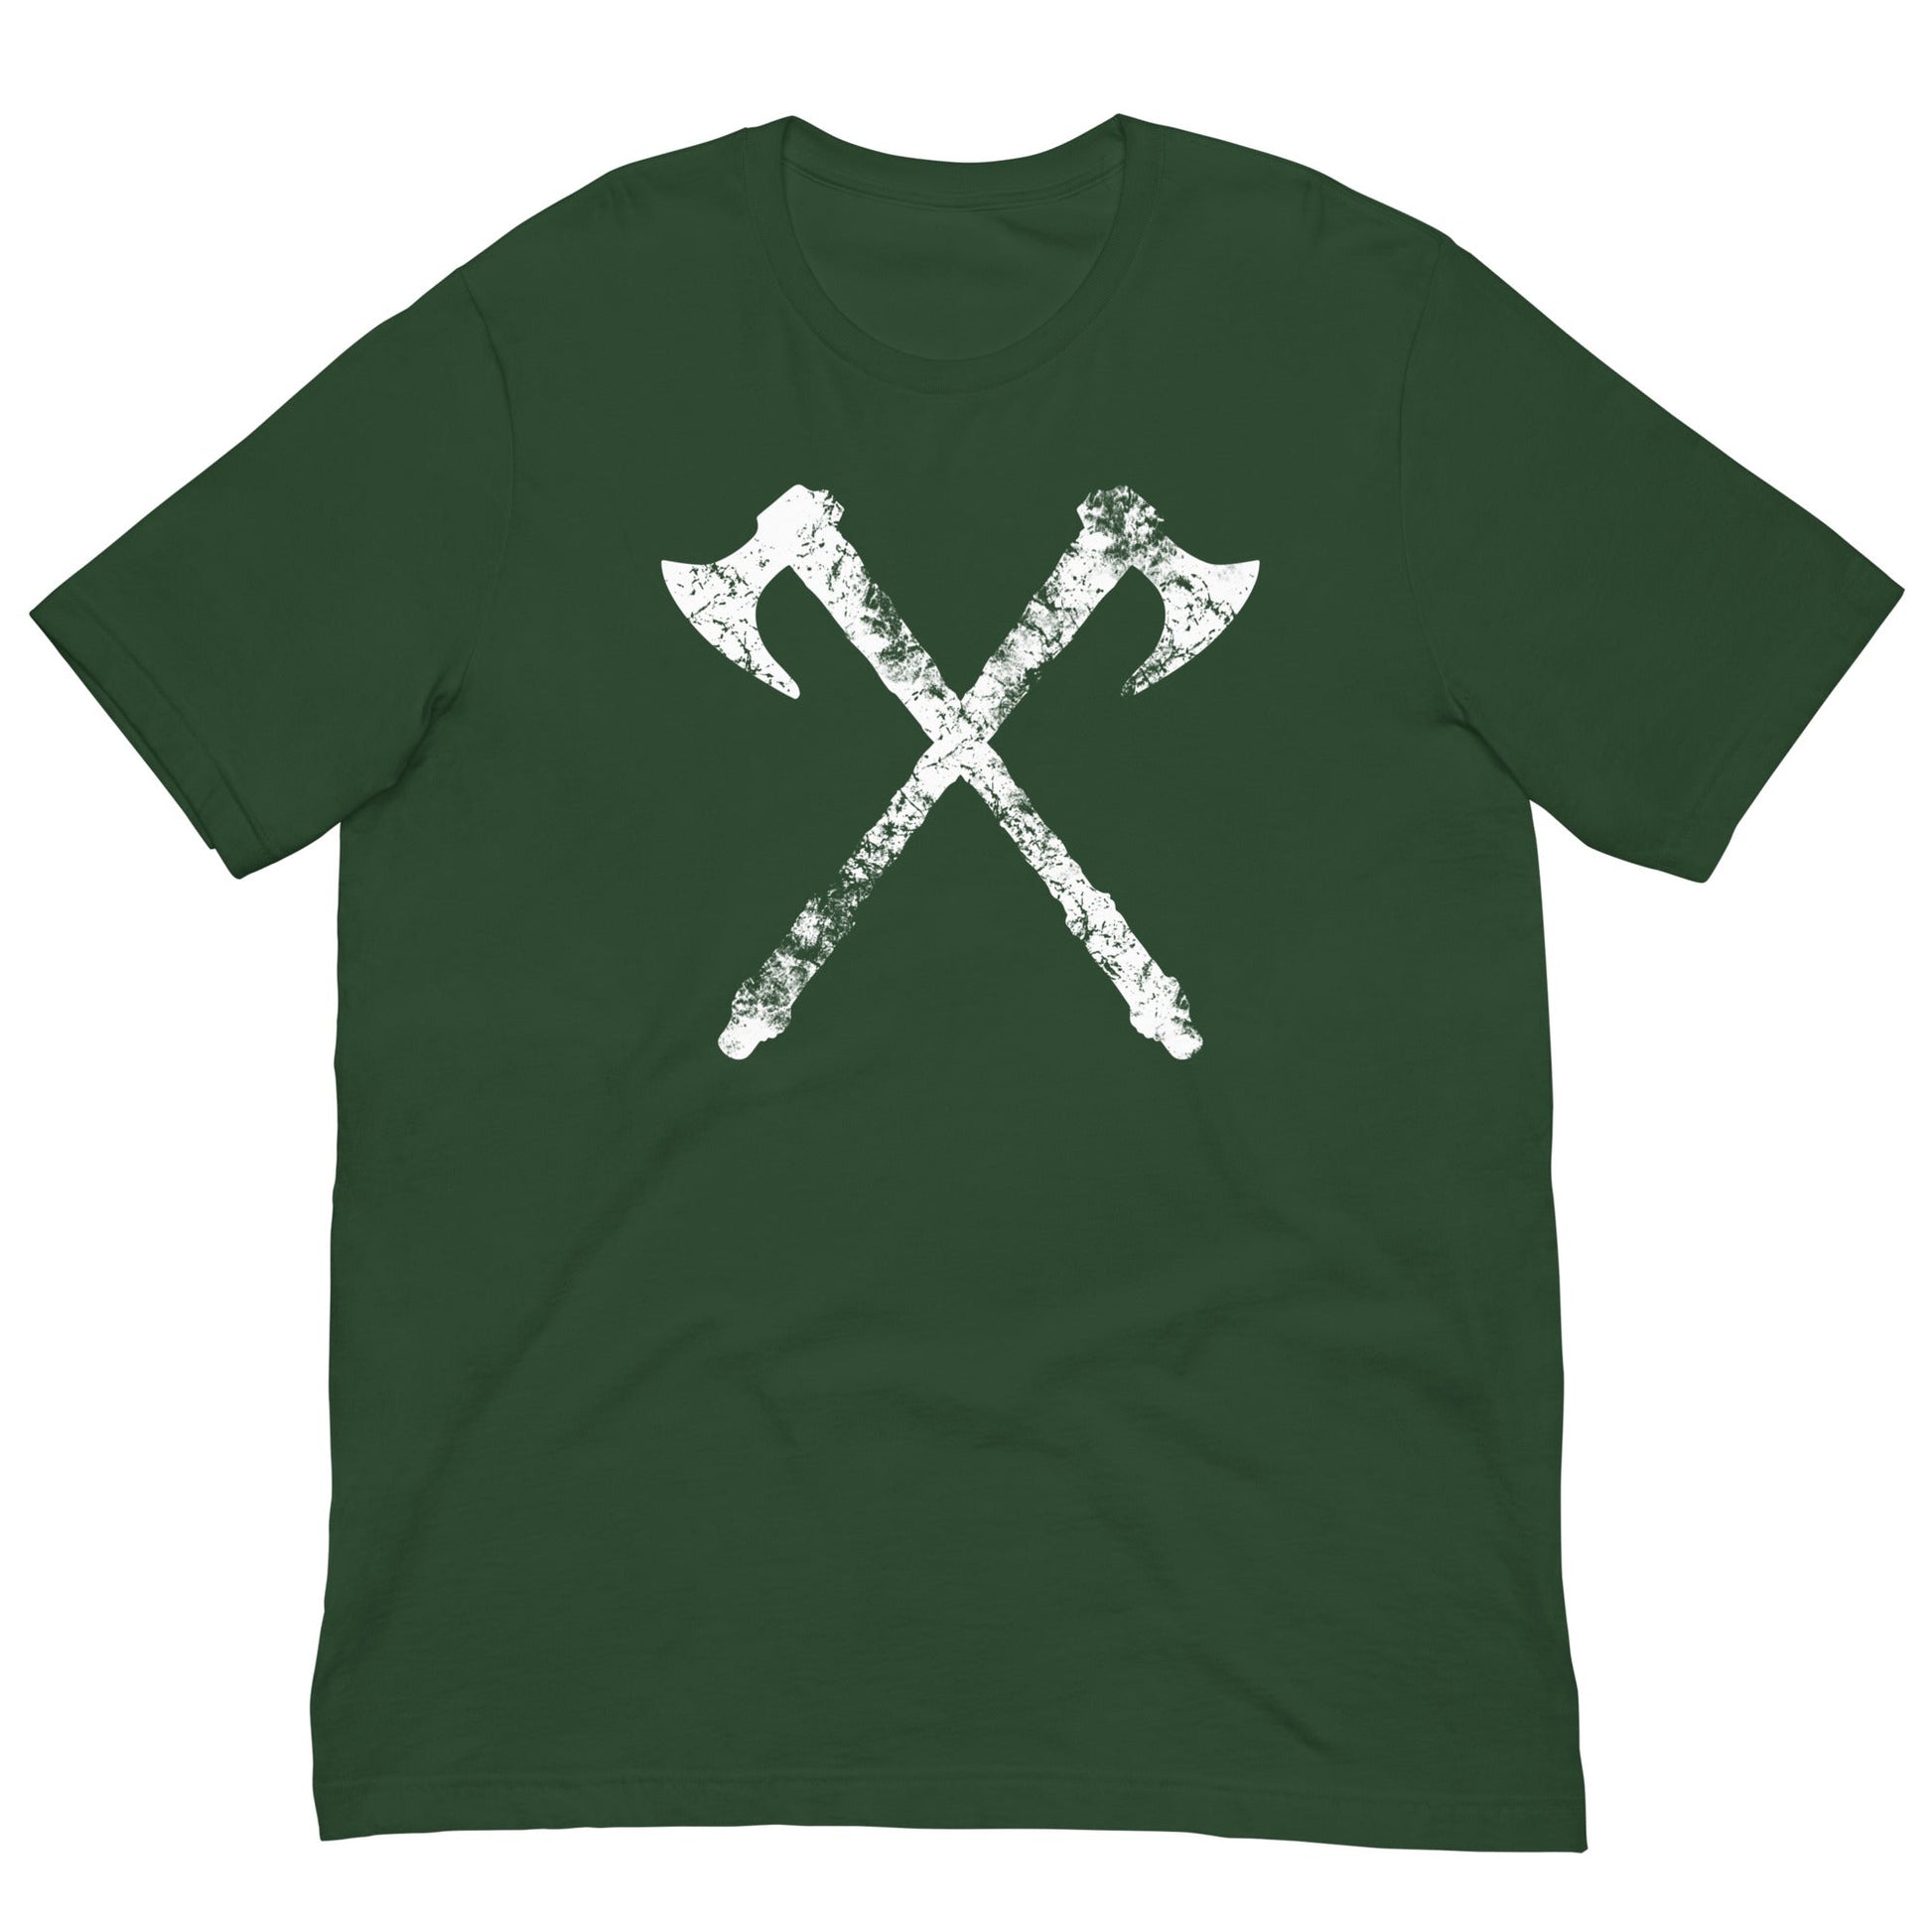 Scar Design Forest / S Vintage Viking Axes T-shirt